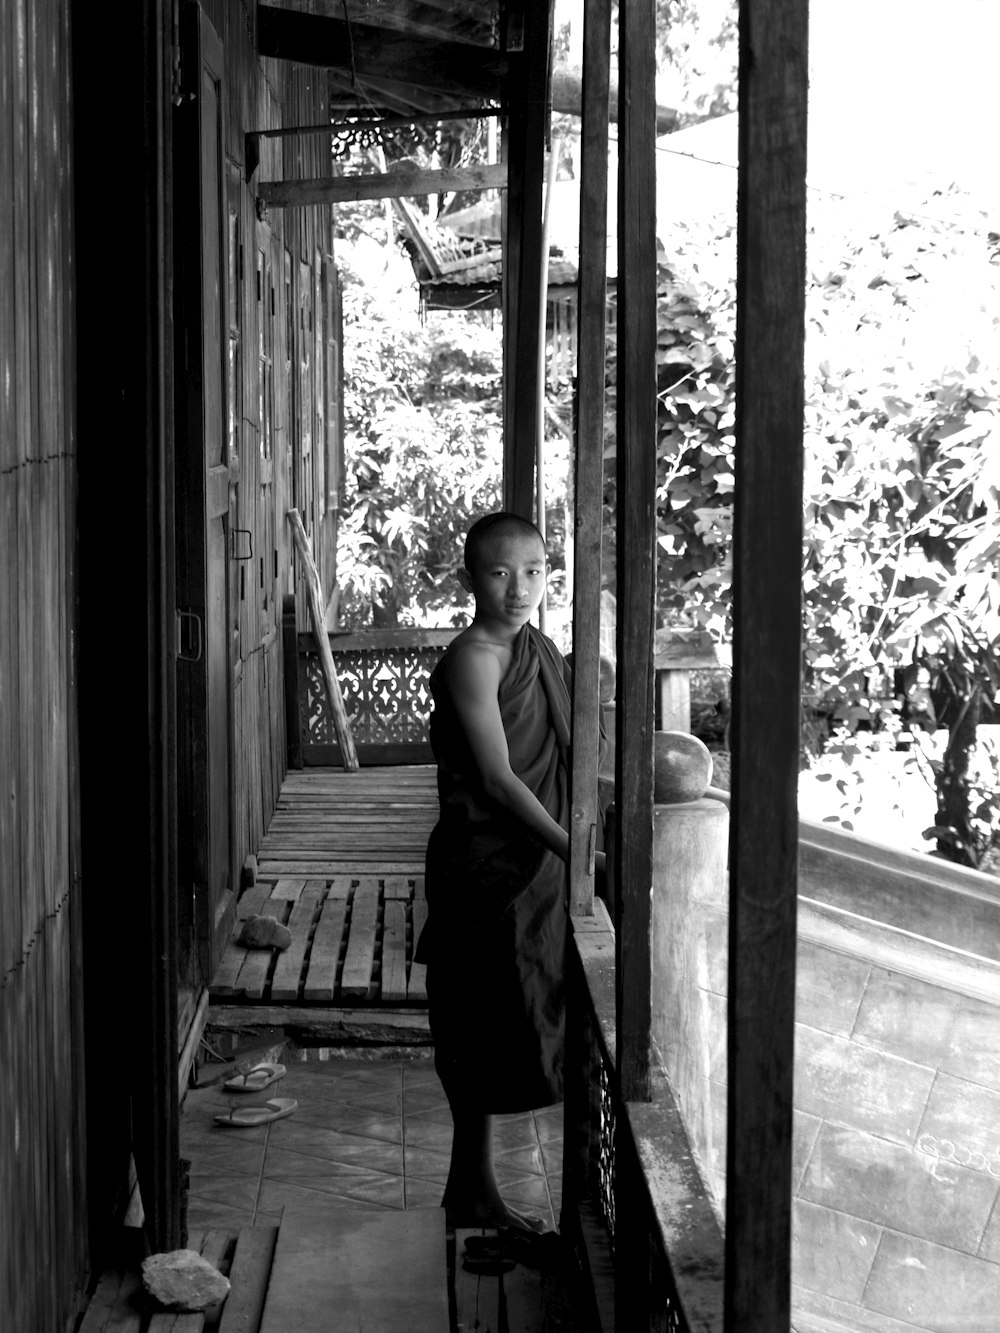 a young boy is standing on a porch